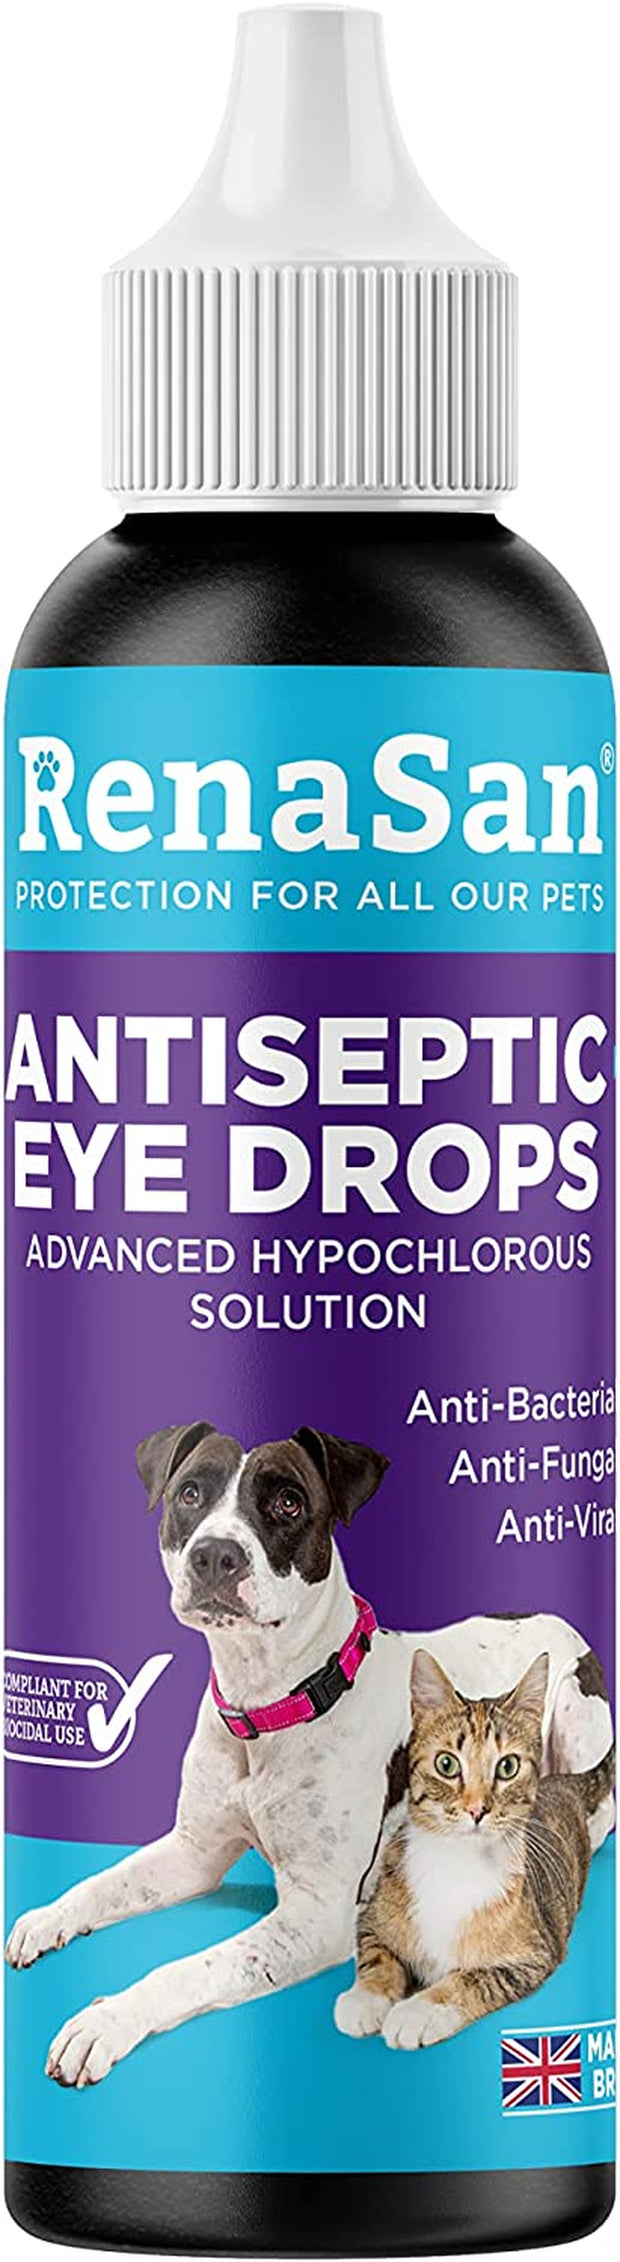 Antiseptic Eye Drops (60 Ml) – Fights Infection, Alcohol-Free, Non-Irritating and Natural Eye Cleaning Solution for Dogs, Cats, Reptiles, Poultry, Avian & Livestock (NEW PACKAGING)